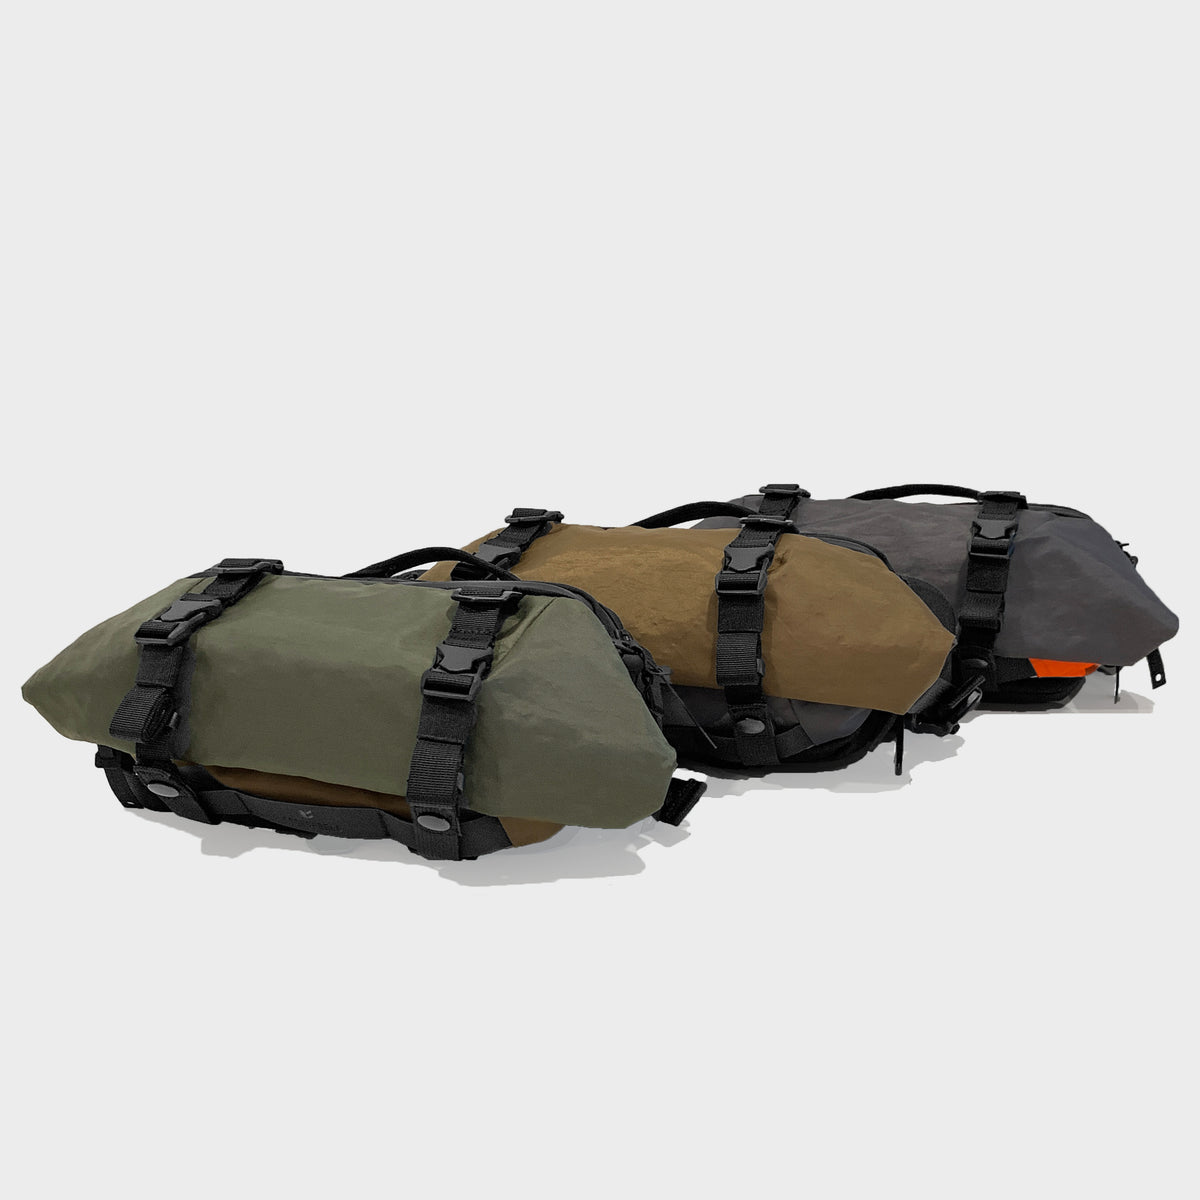 X-POD II - Sling Pack (S) Hybird Color